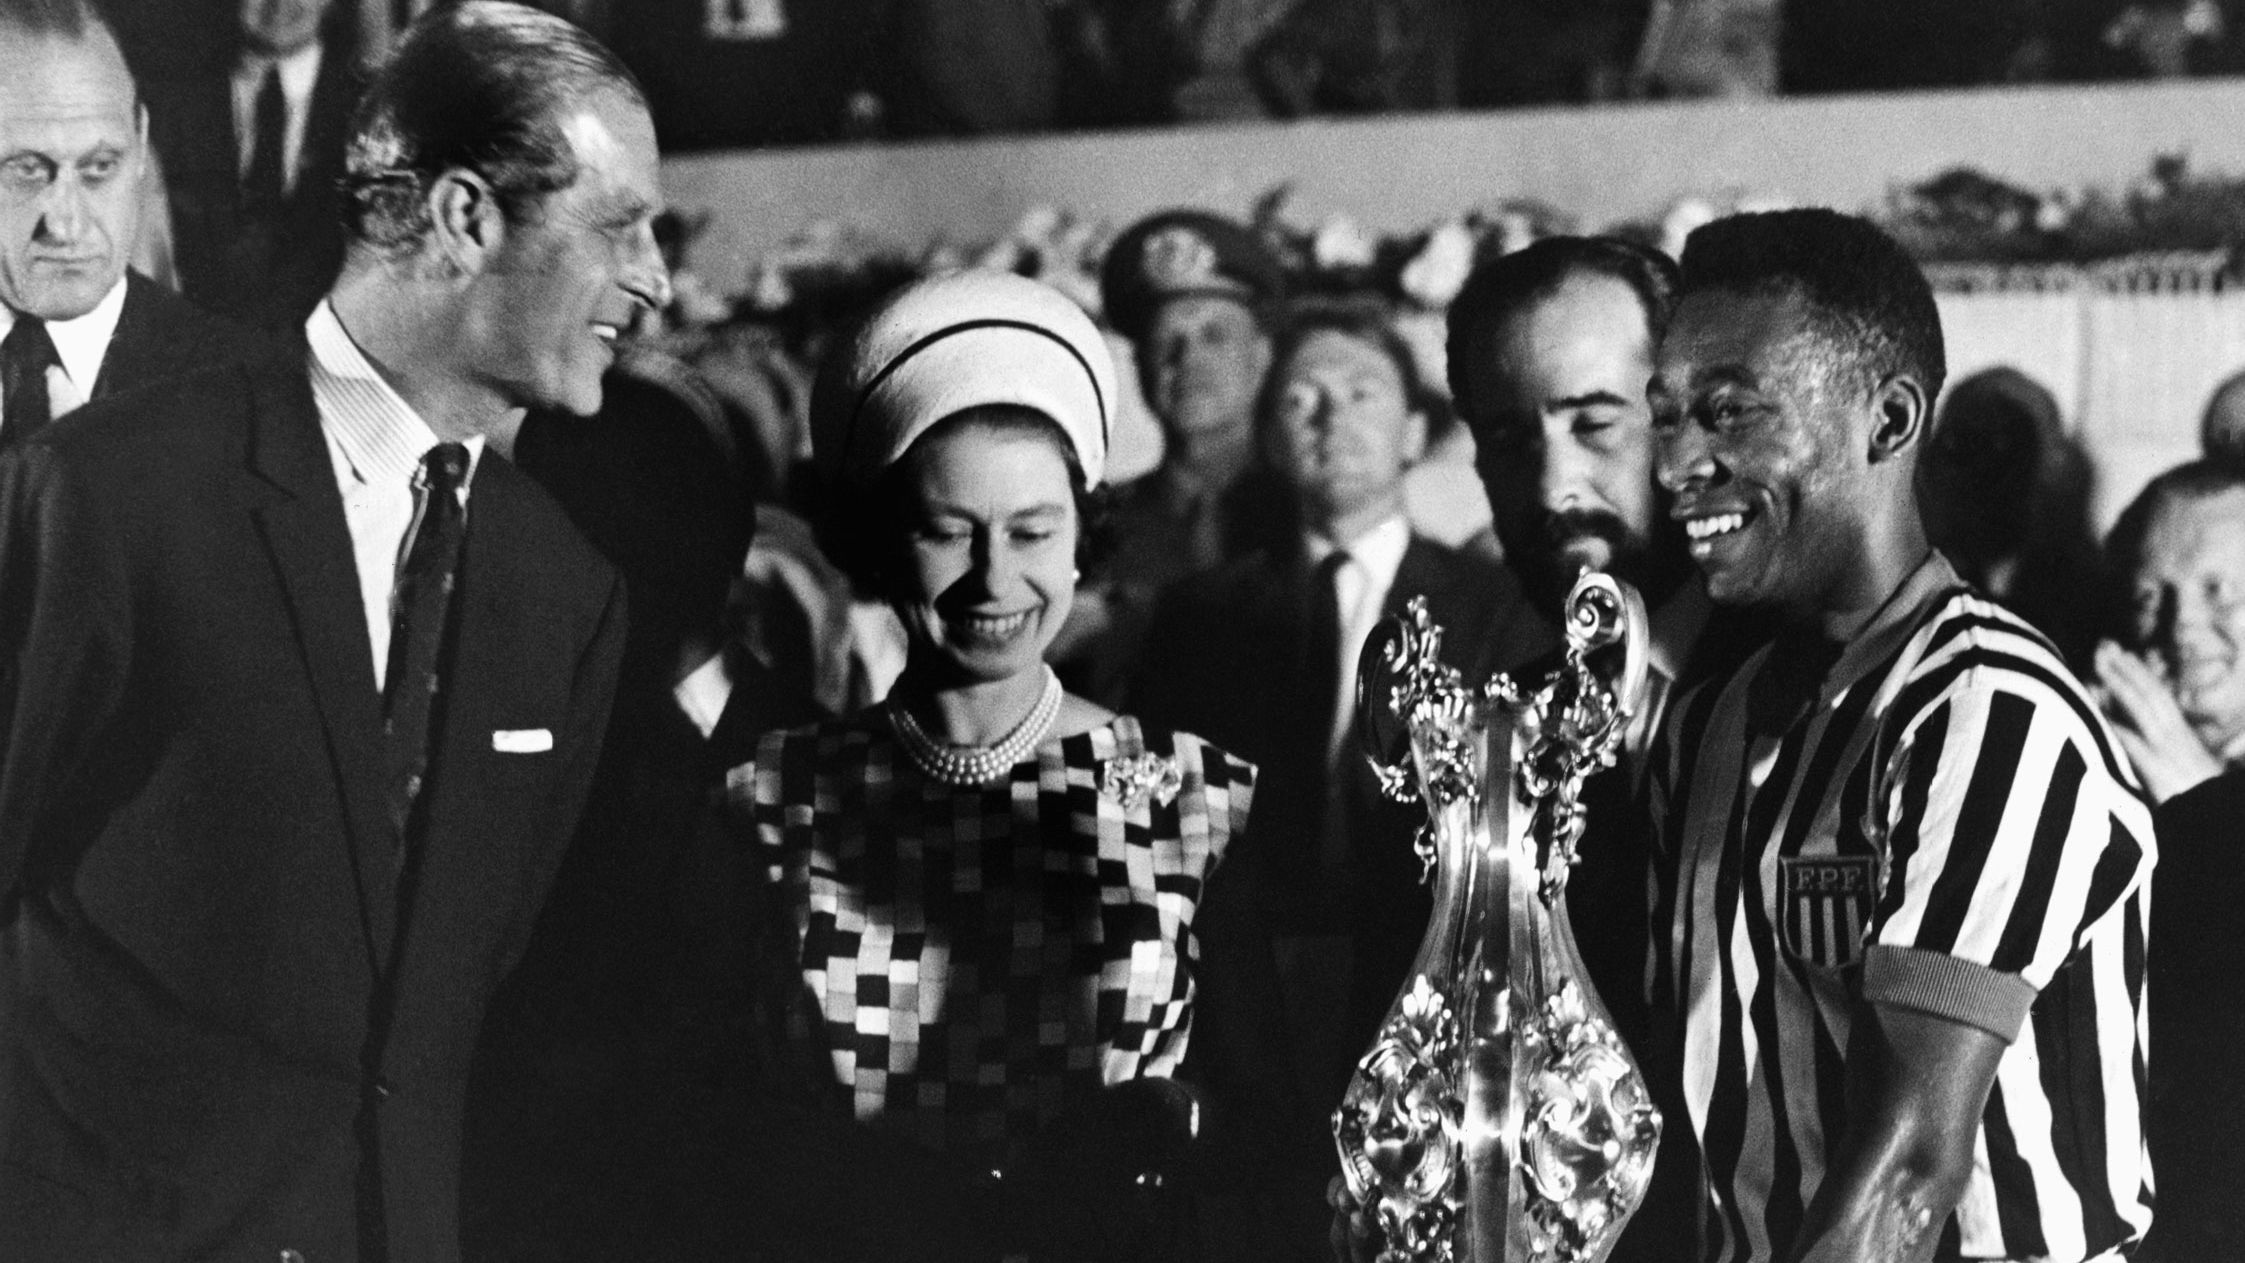 Britain's Queen Elizabeth II, accompanied by her husband, Prince Philip, award a trophy to Pelé after watching a match in Rio de Janeiro in 1968.